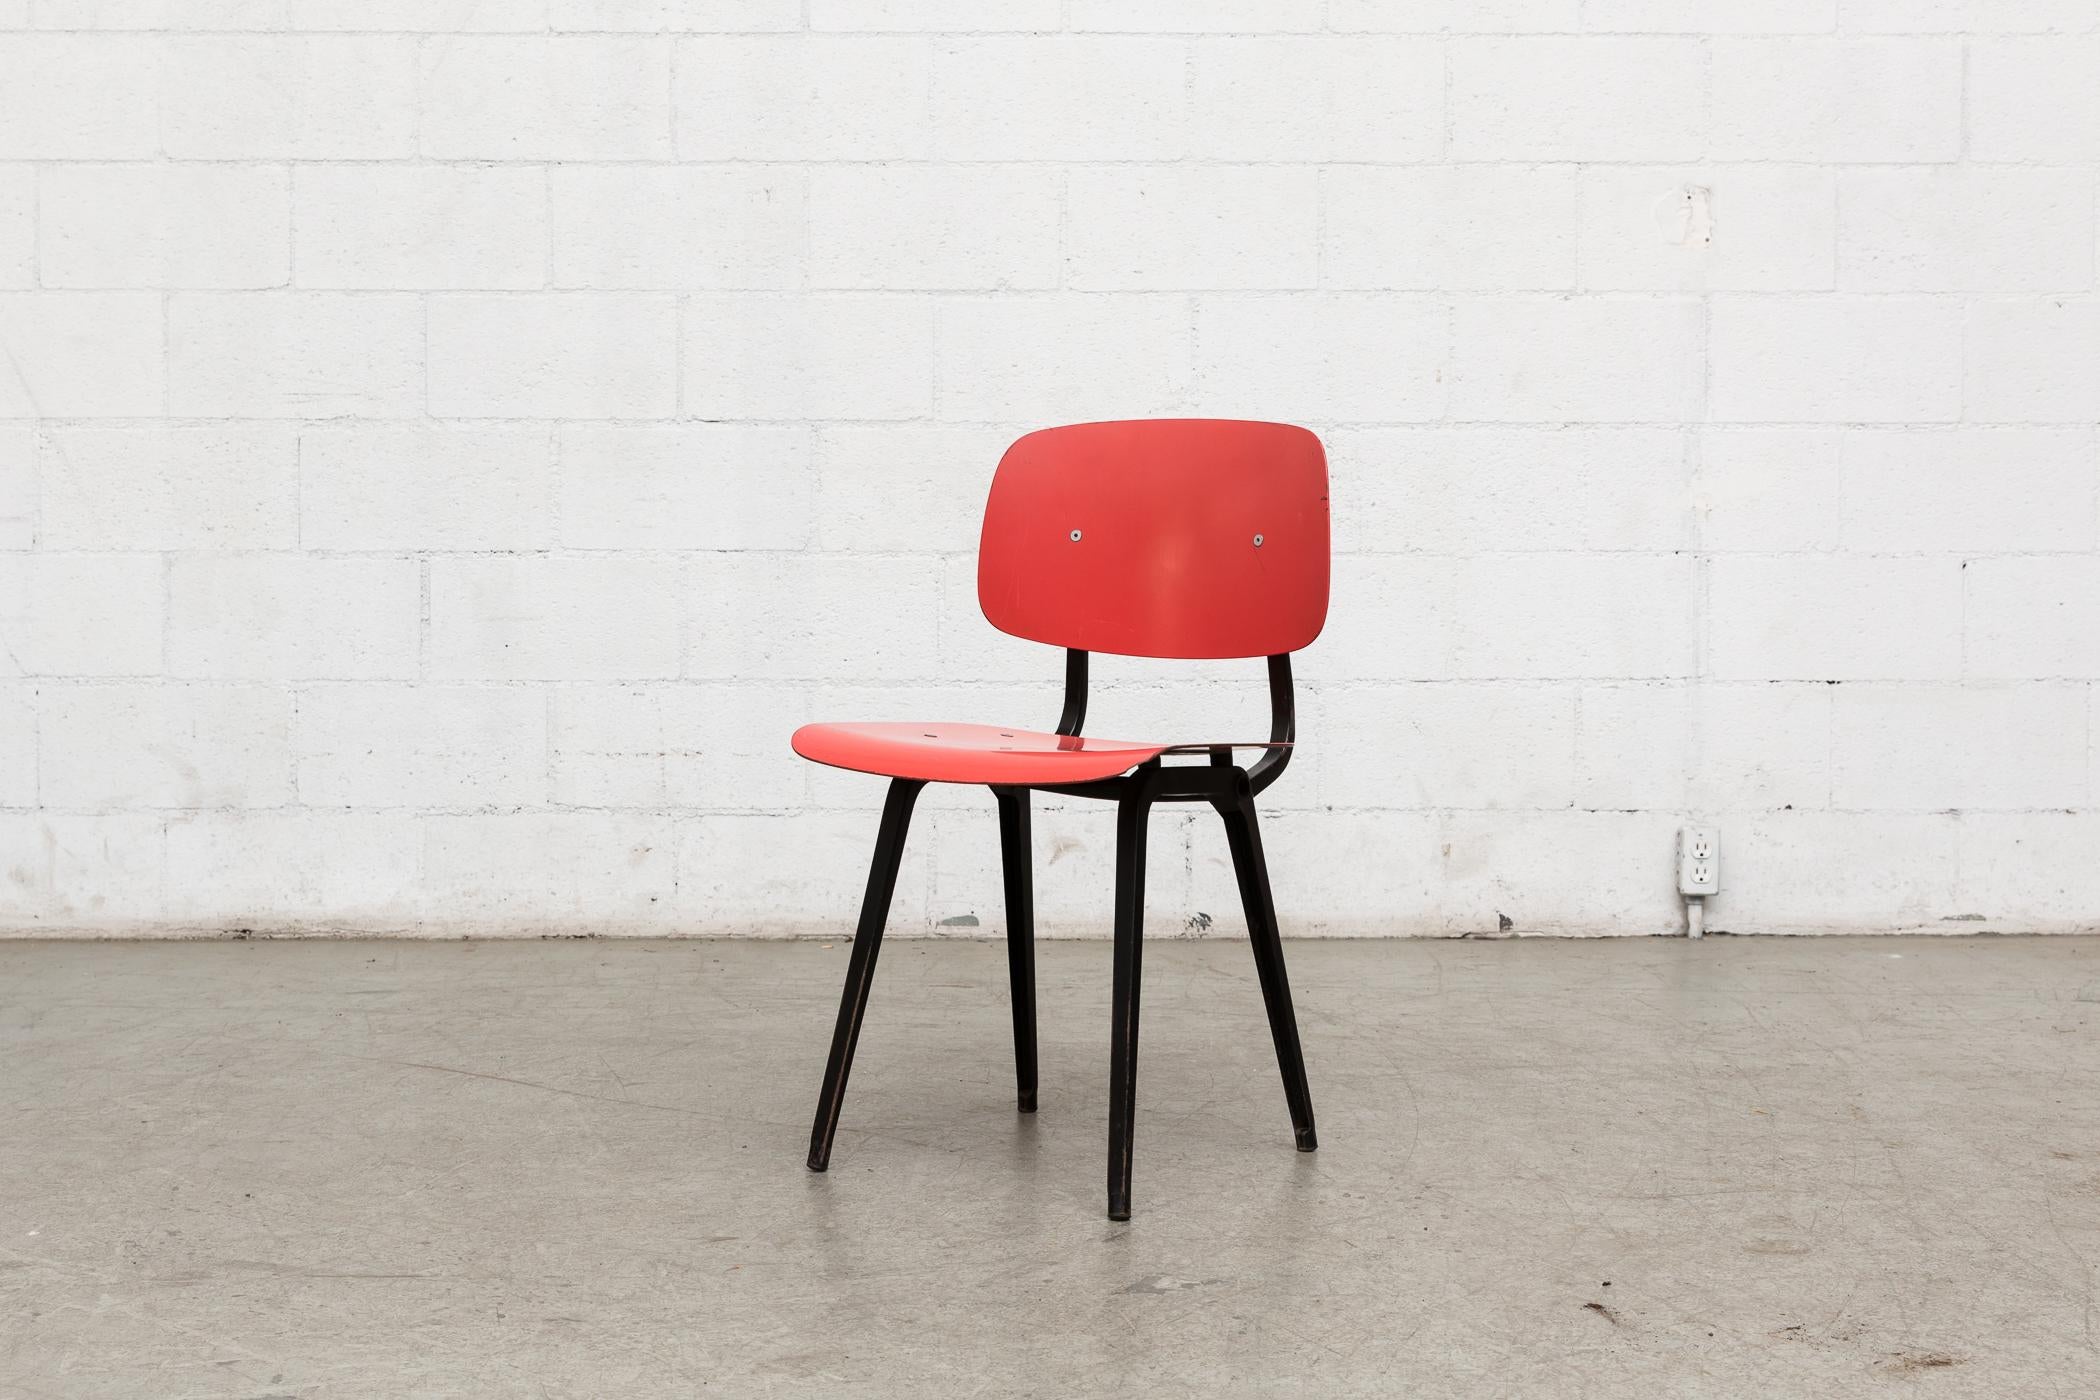 Originally designed in 1953 by possibly the greatest of all Dutch mid-century designers, Friso Kramer, and created for renowned furniture maker Ahrend de Cirkel The Revolt was intended as a cost effective, durable and esthetically pleasing mass